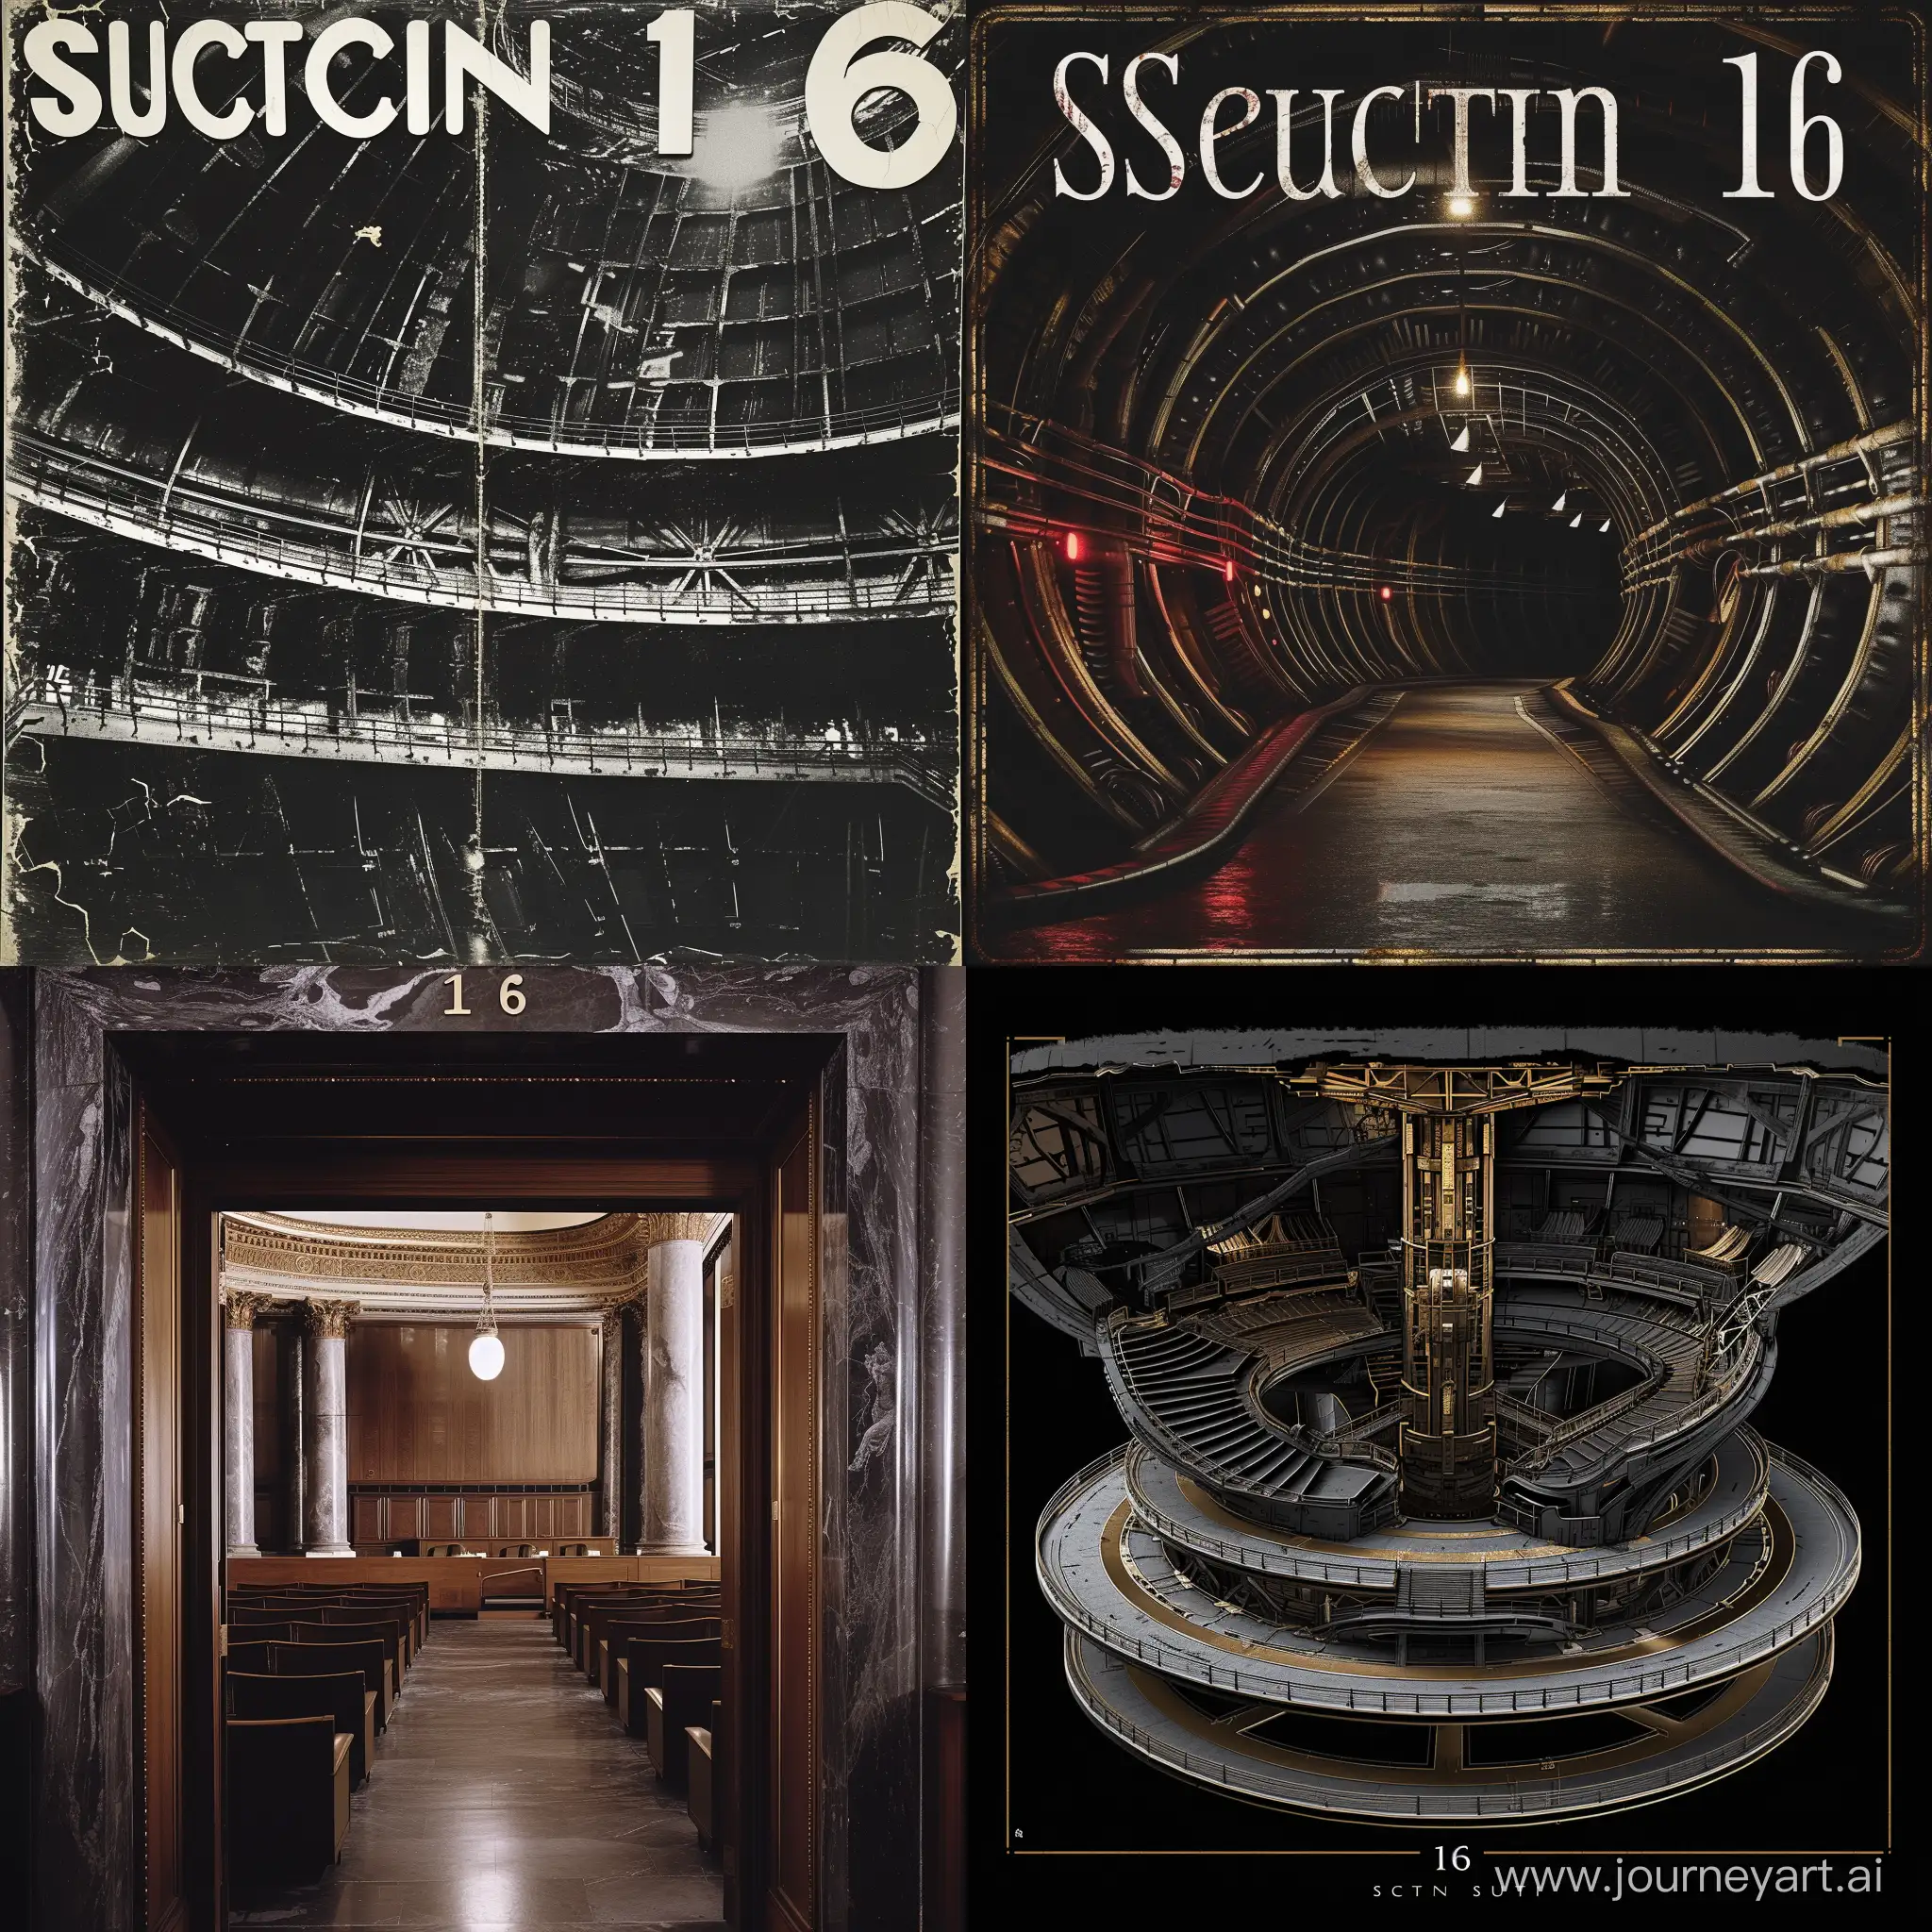 Section 16